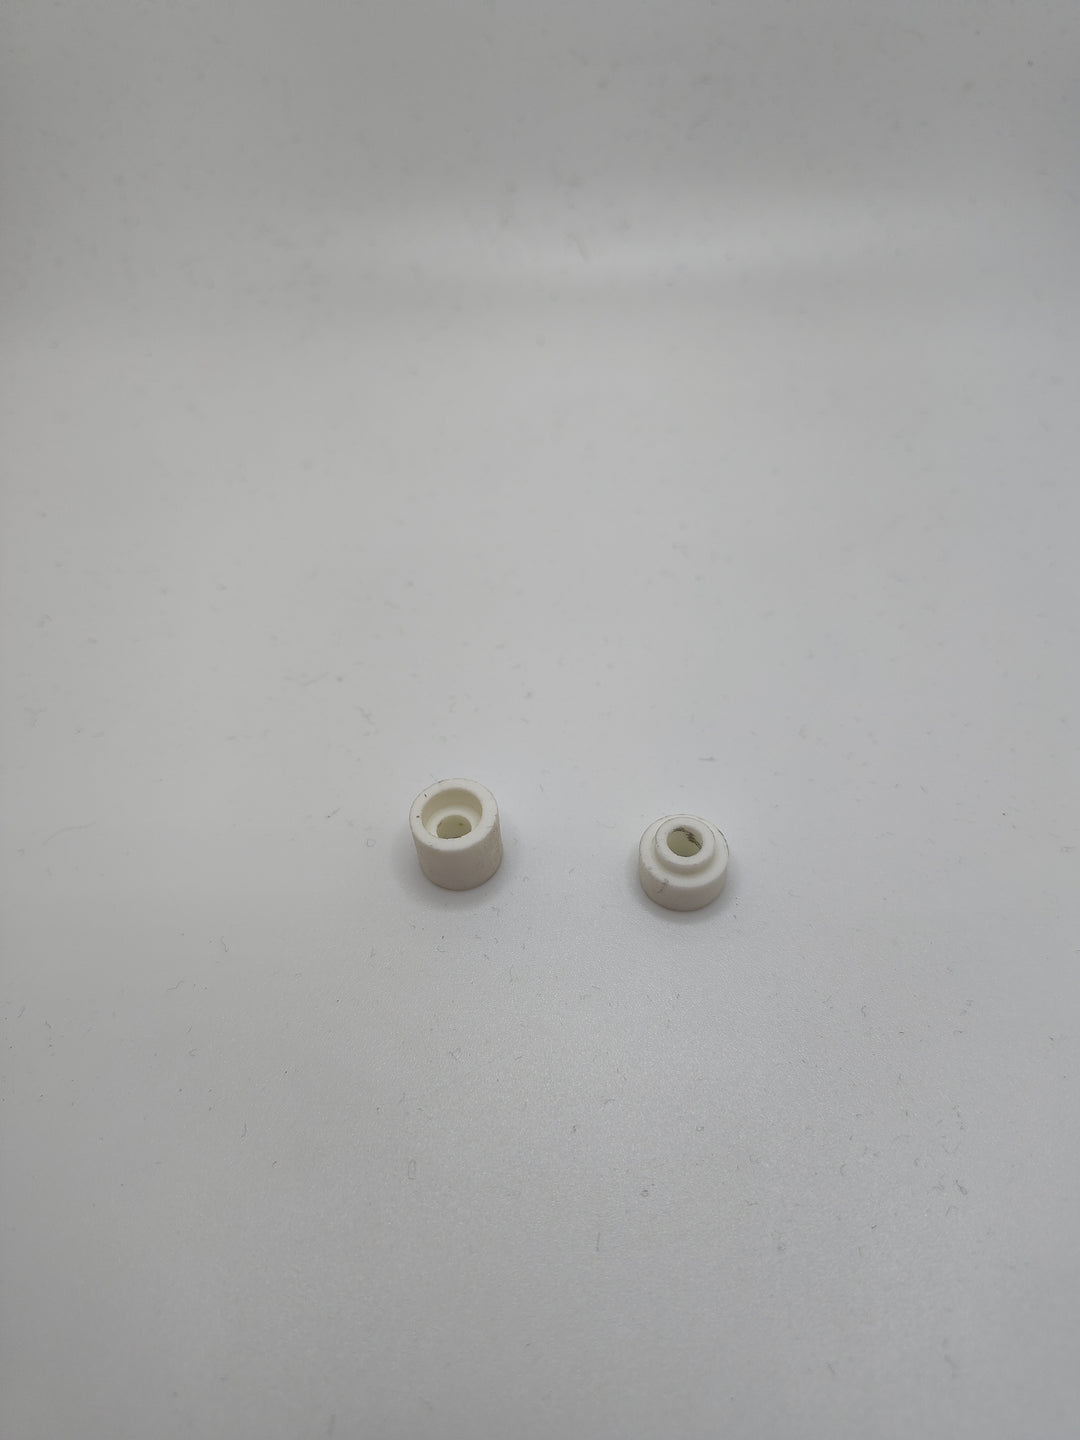 CERAMIC WASHER FOR heating element for Magic Mill dehydrator